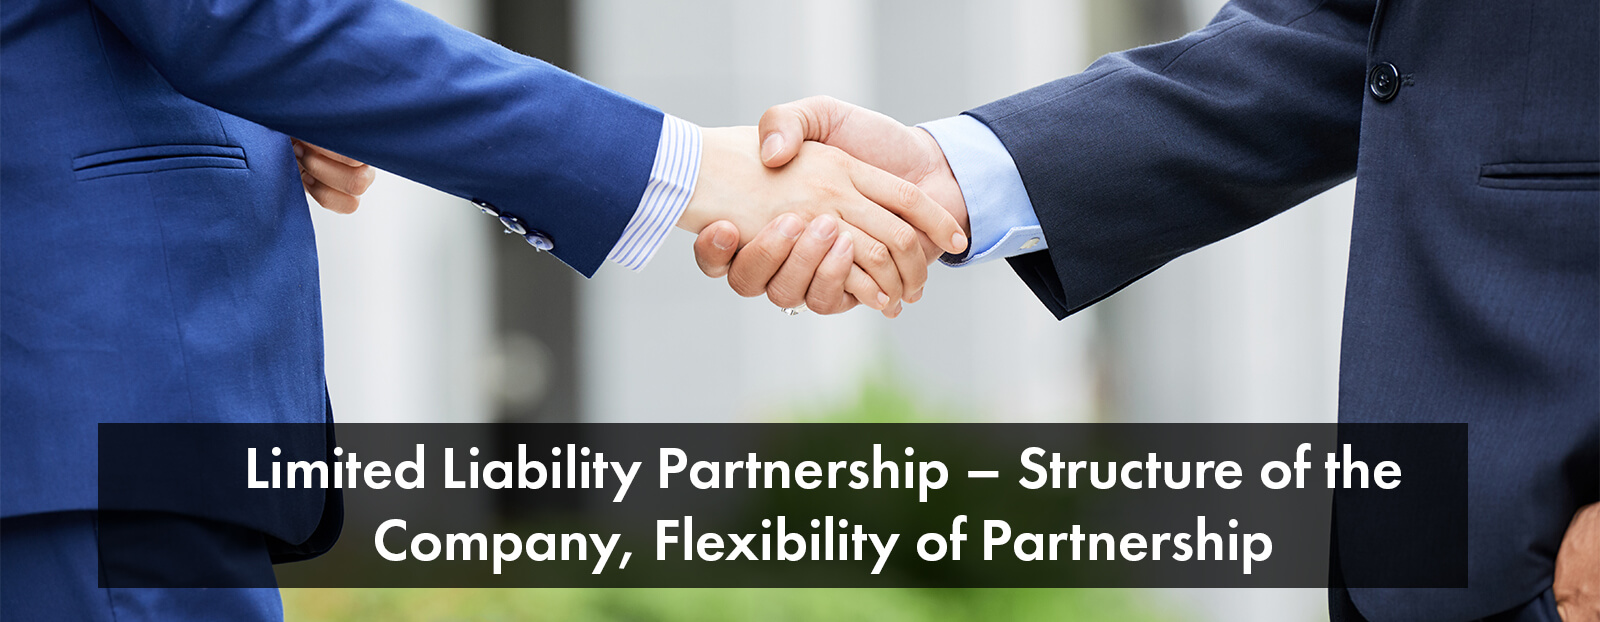 Limited Liability Partnership – Structure of the Company, Flexibility of Partnership